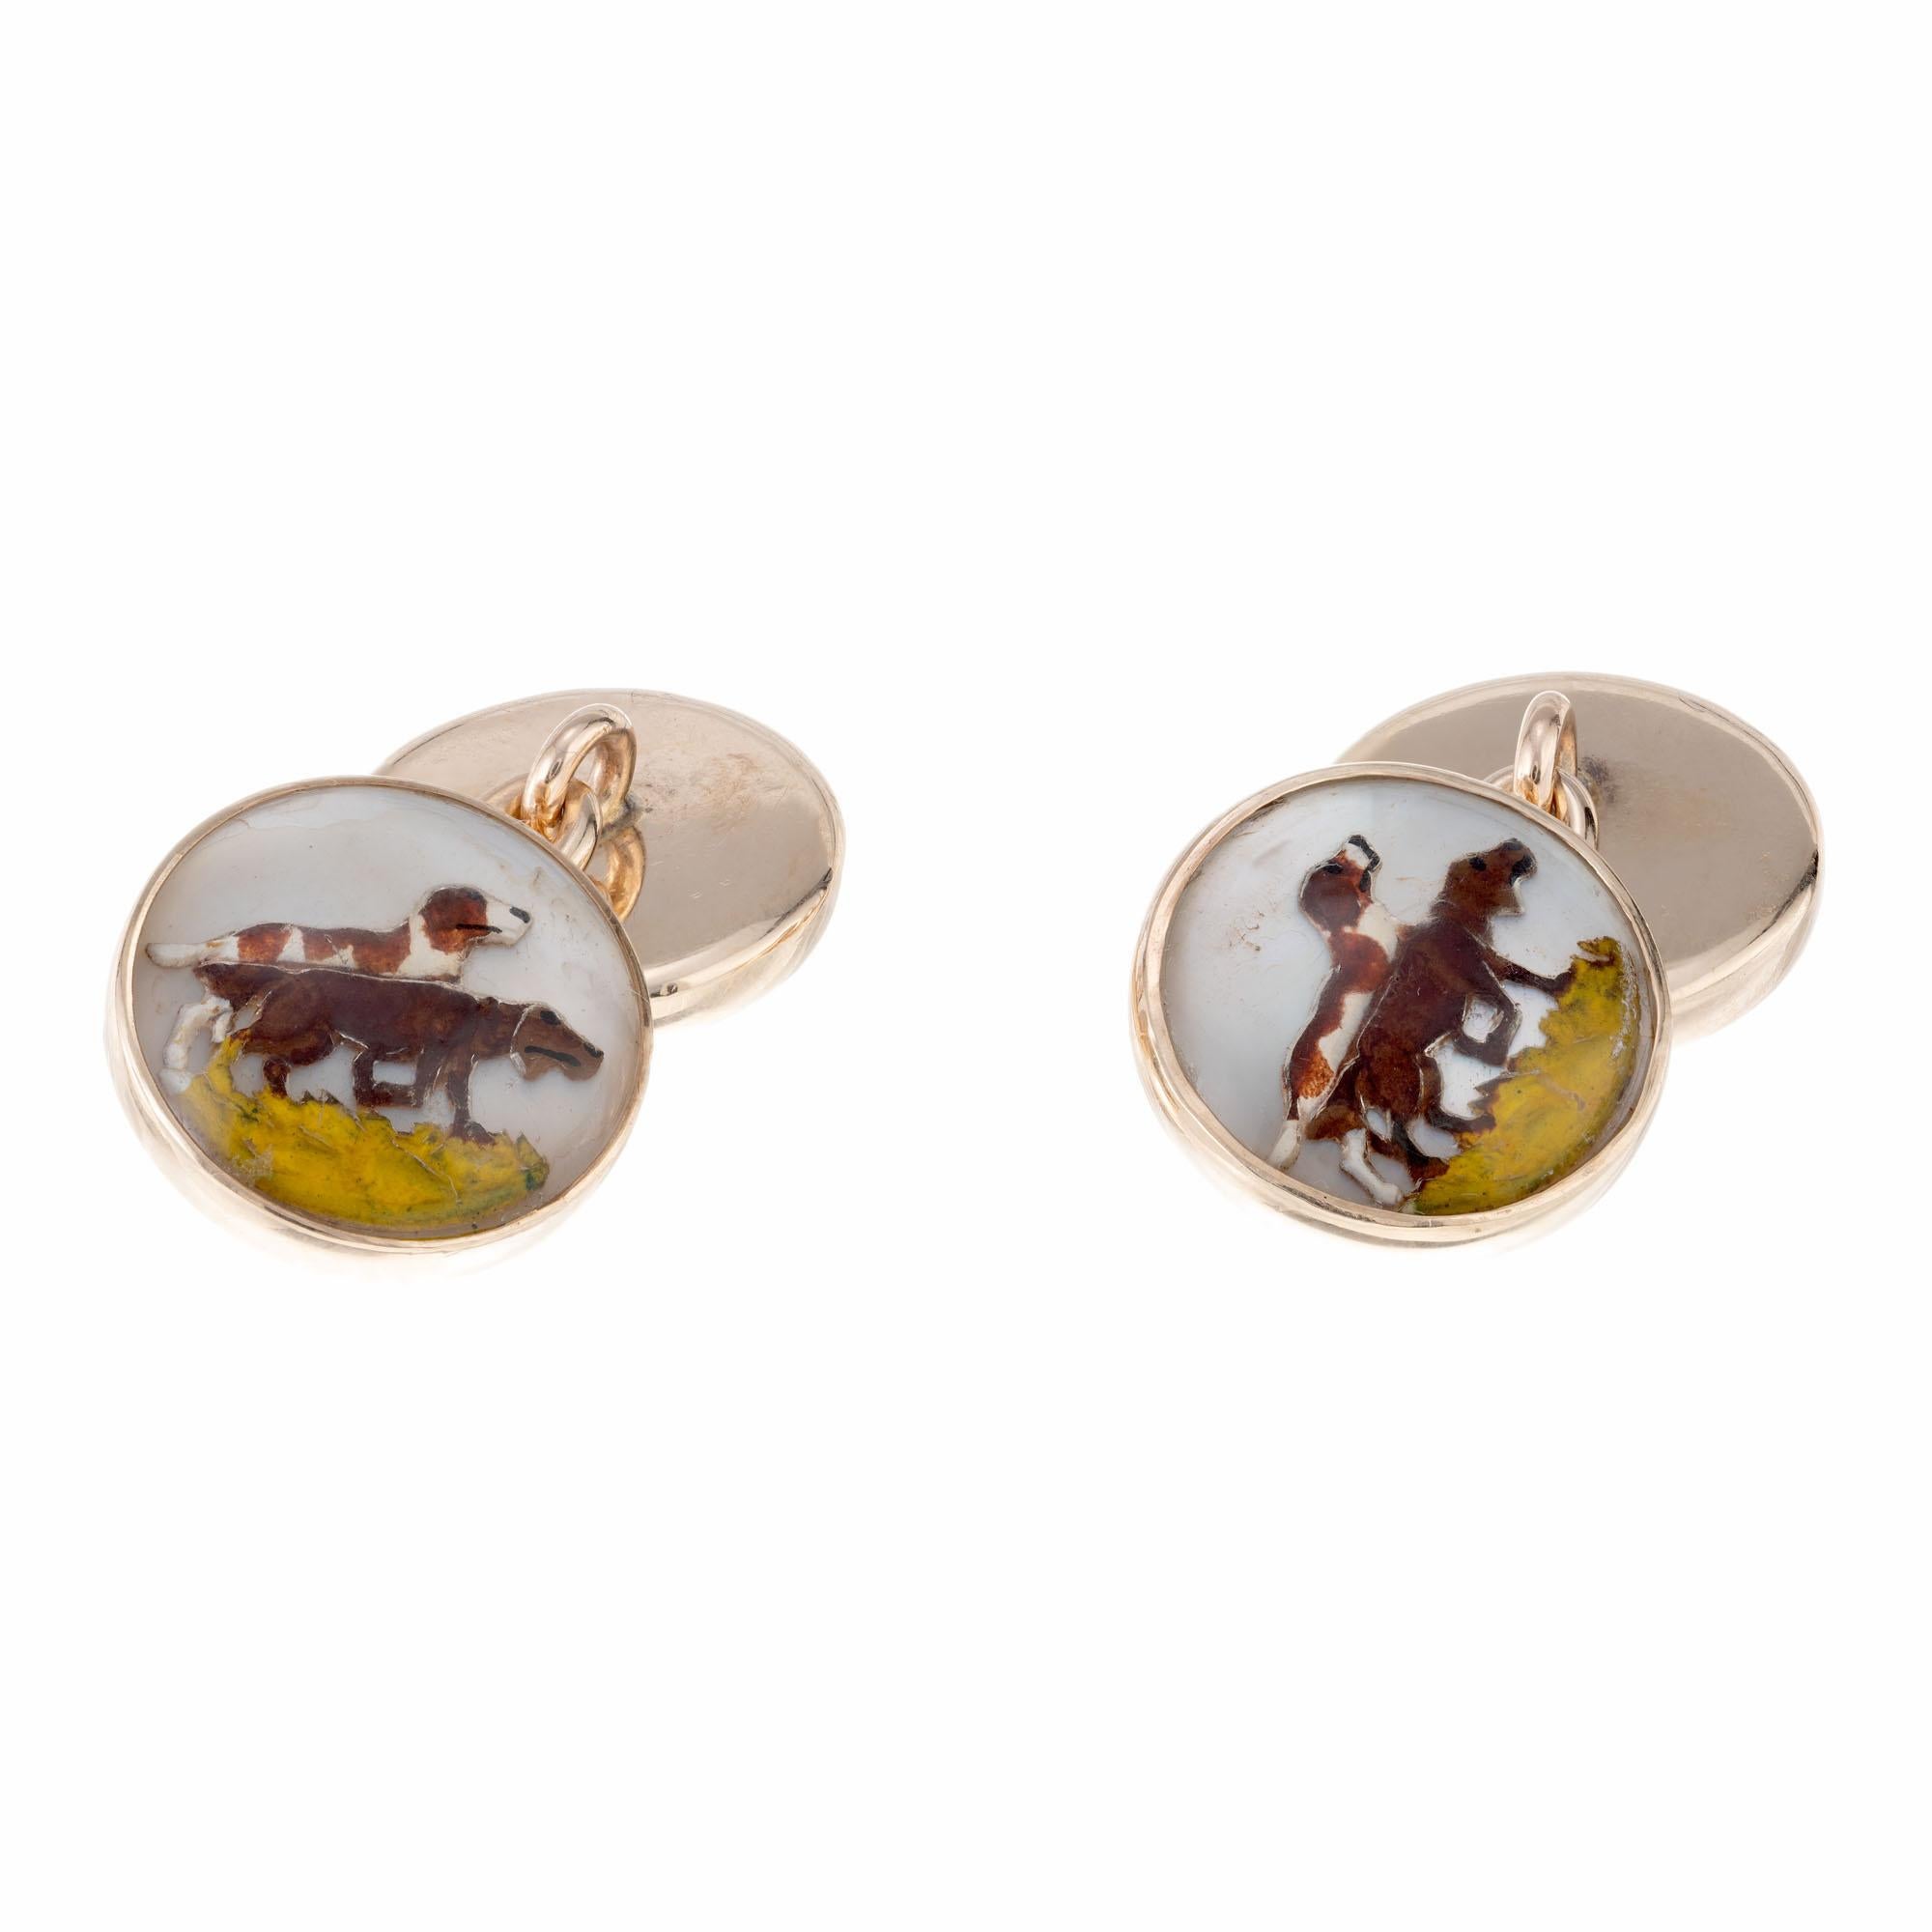 1940's Double sided pointer hunting dog cufflinks made of hand carved and painted quartz in 14k yellow gold.

4 cabochon round quartz
14k yellow gold 
Stamped: 14k
7.2 grams
Top to bottom: 25.7mm or 1 Inch
Width: 13.6mm or .5 Inch
Depth or